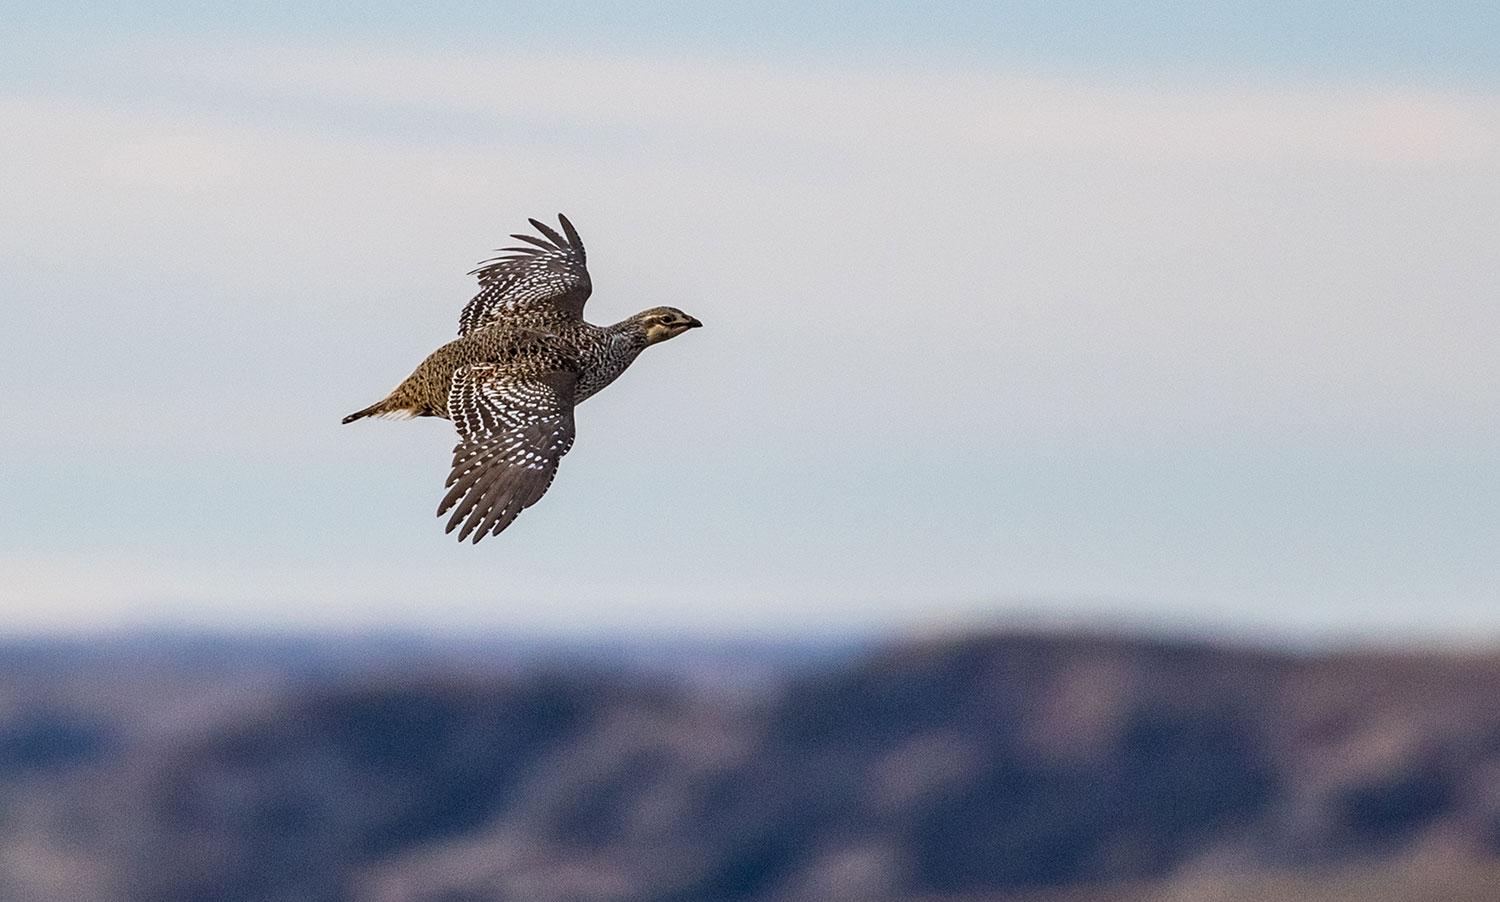 Sharp-tailed grouse flying